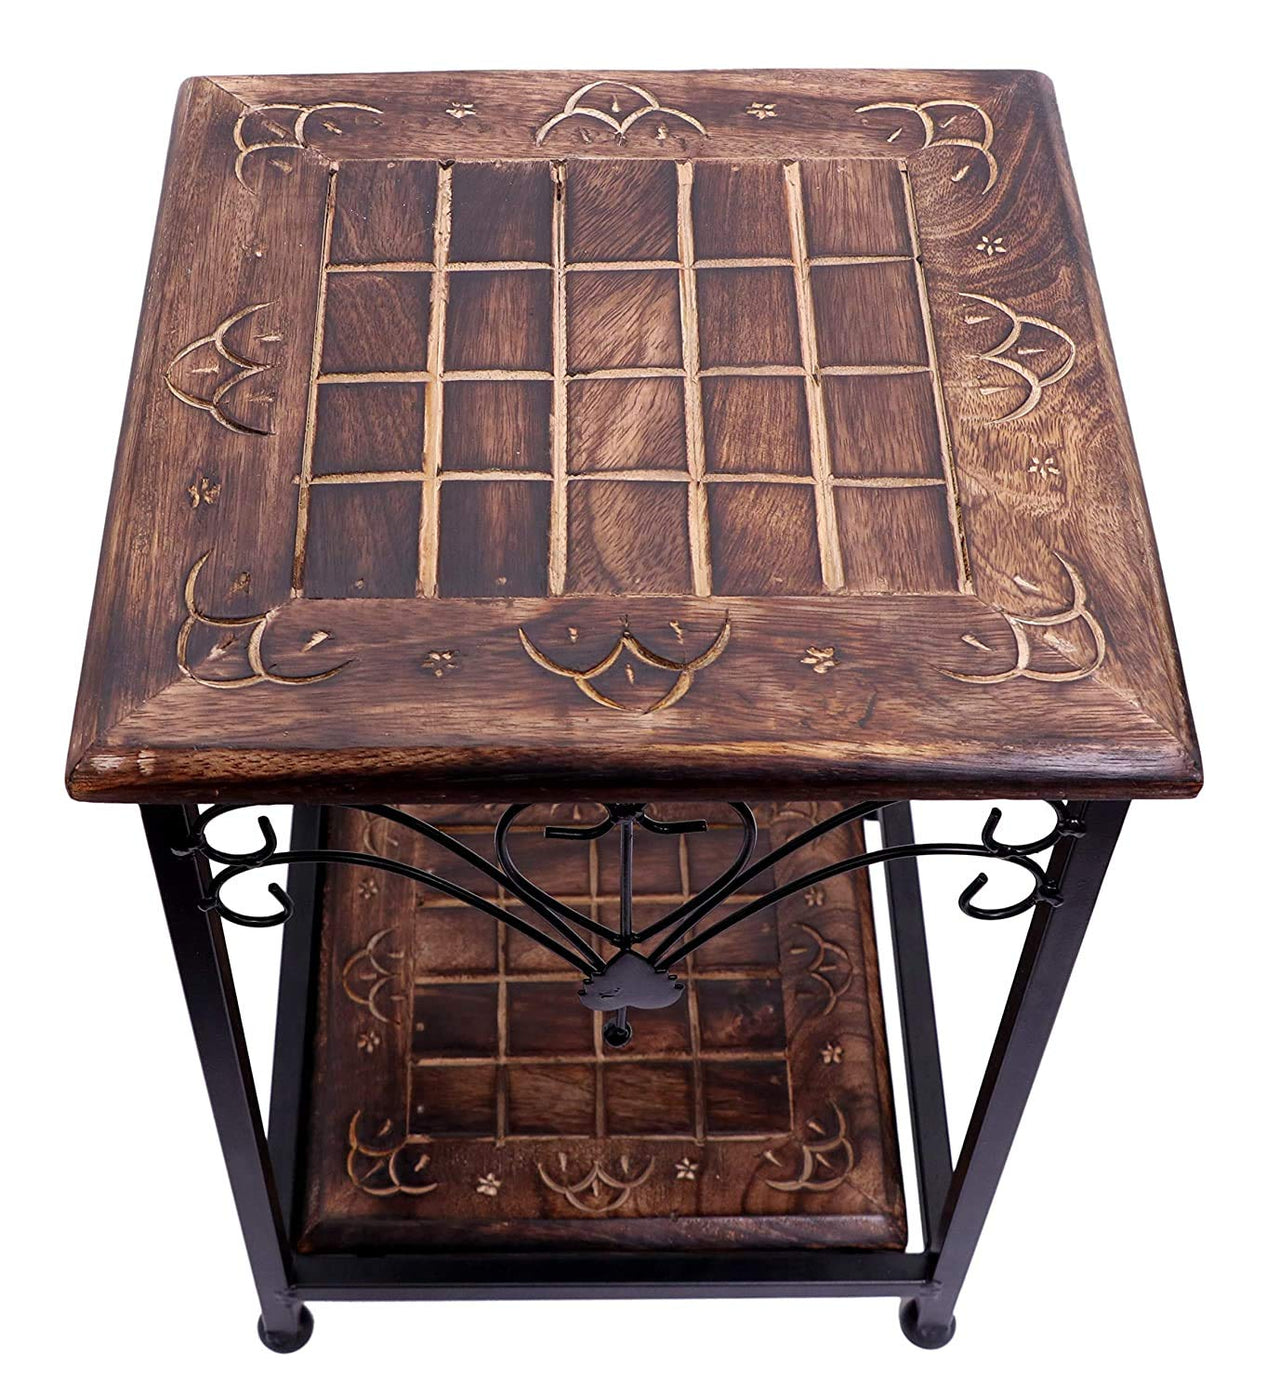 Wooden & Iron Stool for Livingroom , Balcony Stool Coffee End Table for Dressing Table, Bedside, Home, Office Dime Store